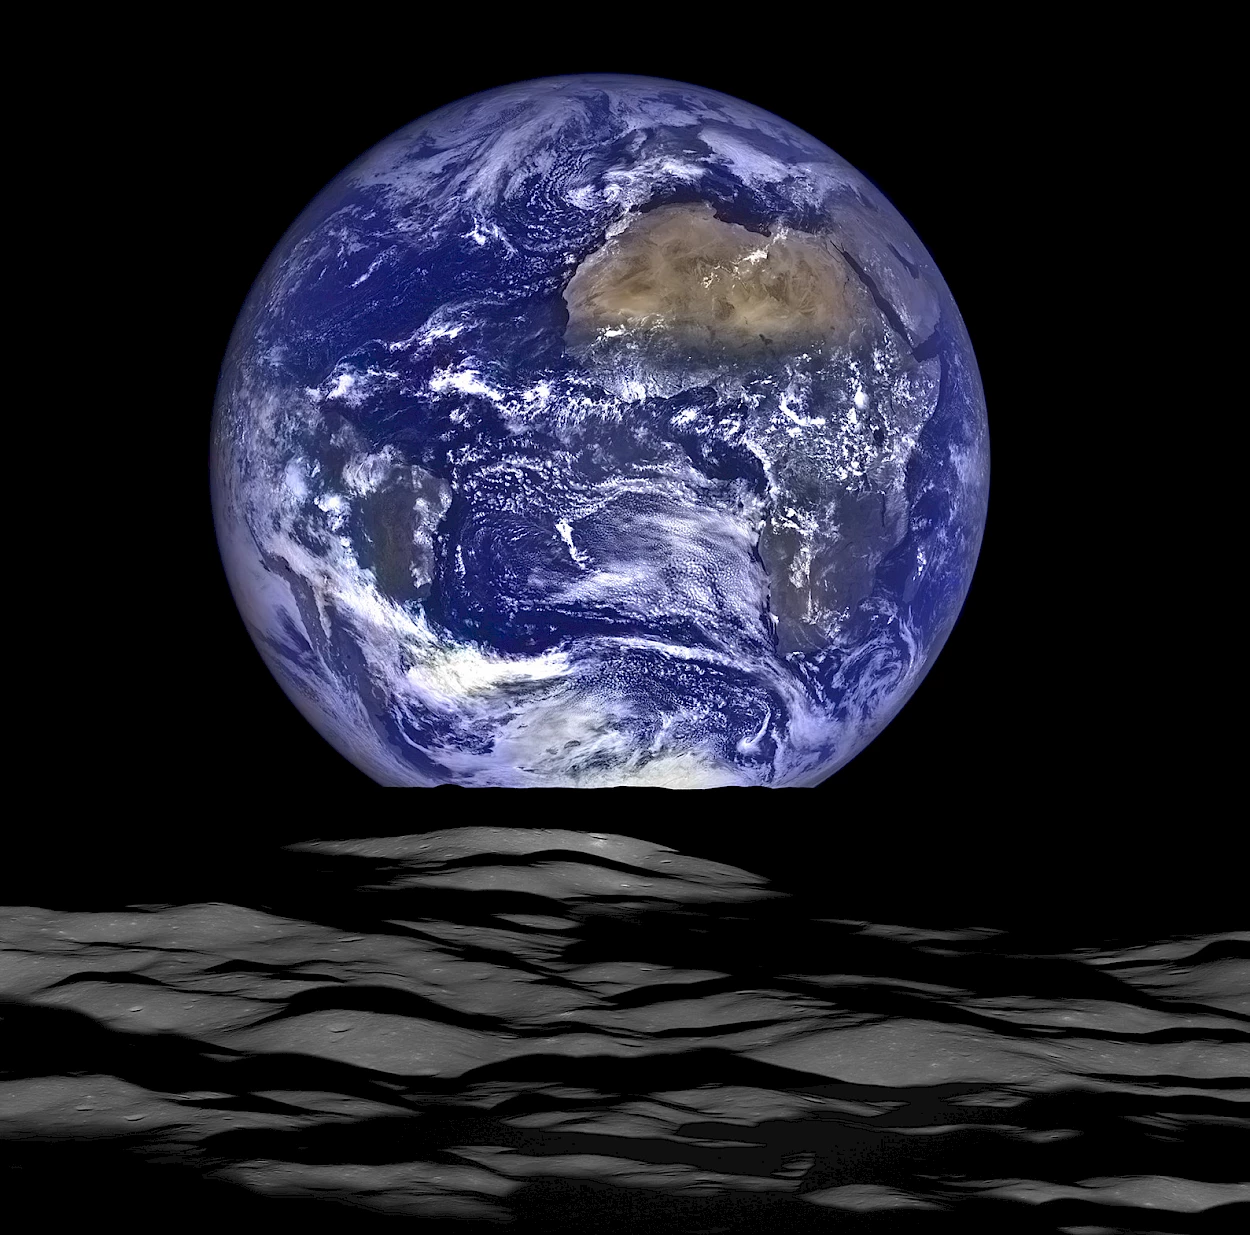 2015: Earthrise 2.0 (Lunar Reconnaissance Orbiter)
Launched in 2009, LRO captures some 12 Earthrises daily, but is generally busy looking at the Moon's surface. On occasions such as this, planets sometimes come into view as LRO points its instruments into space for atmospheric observations and calibration.